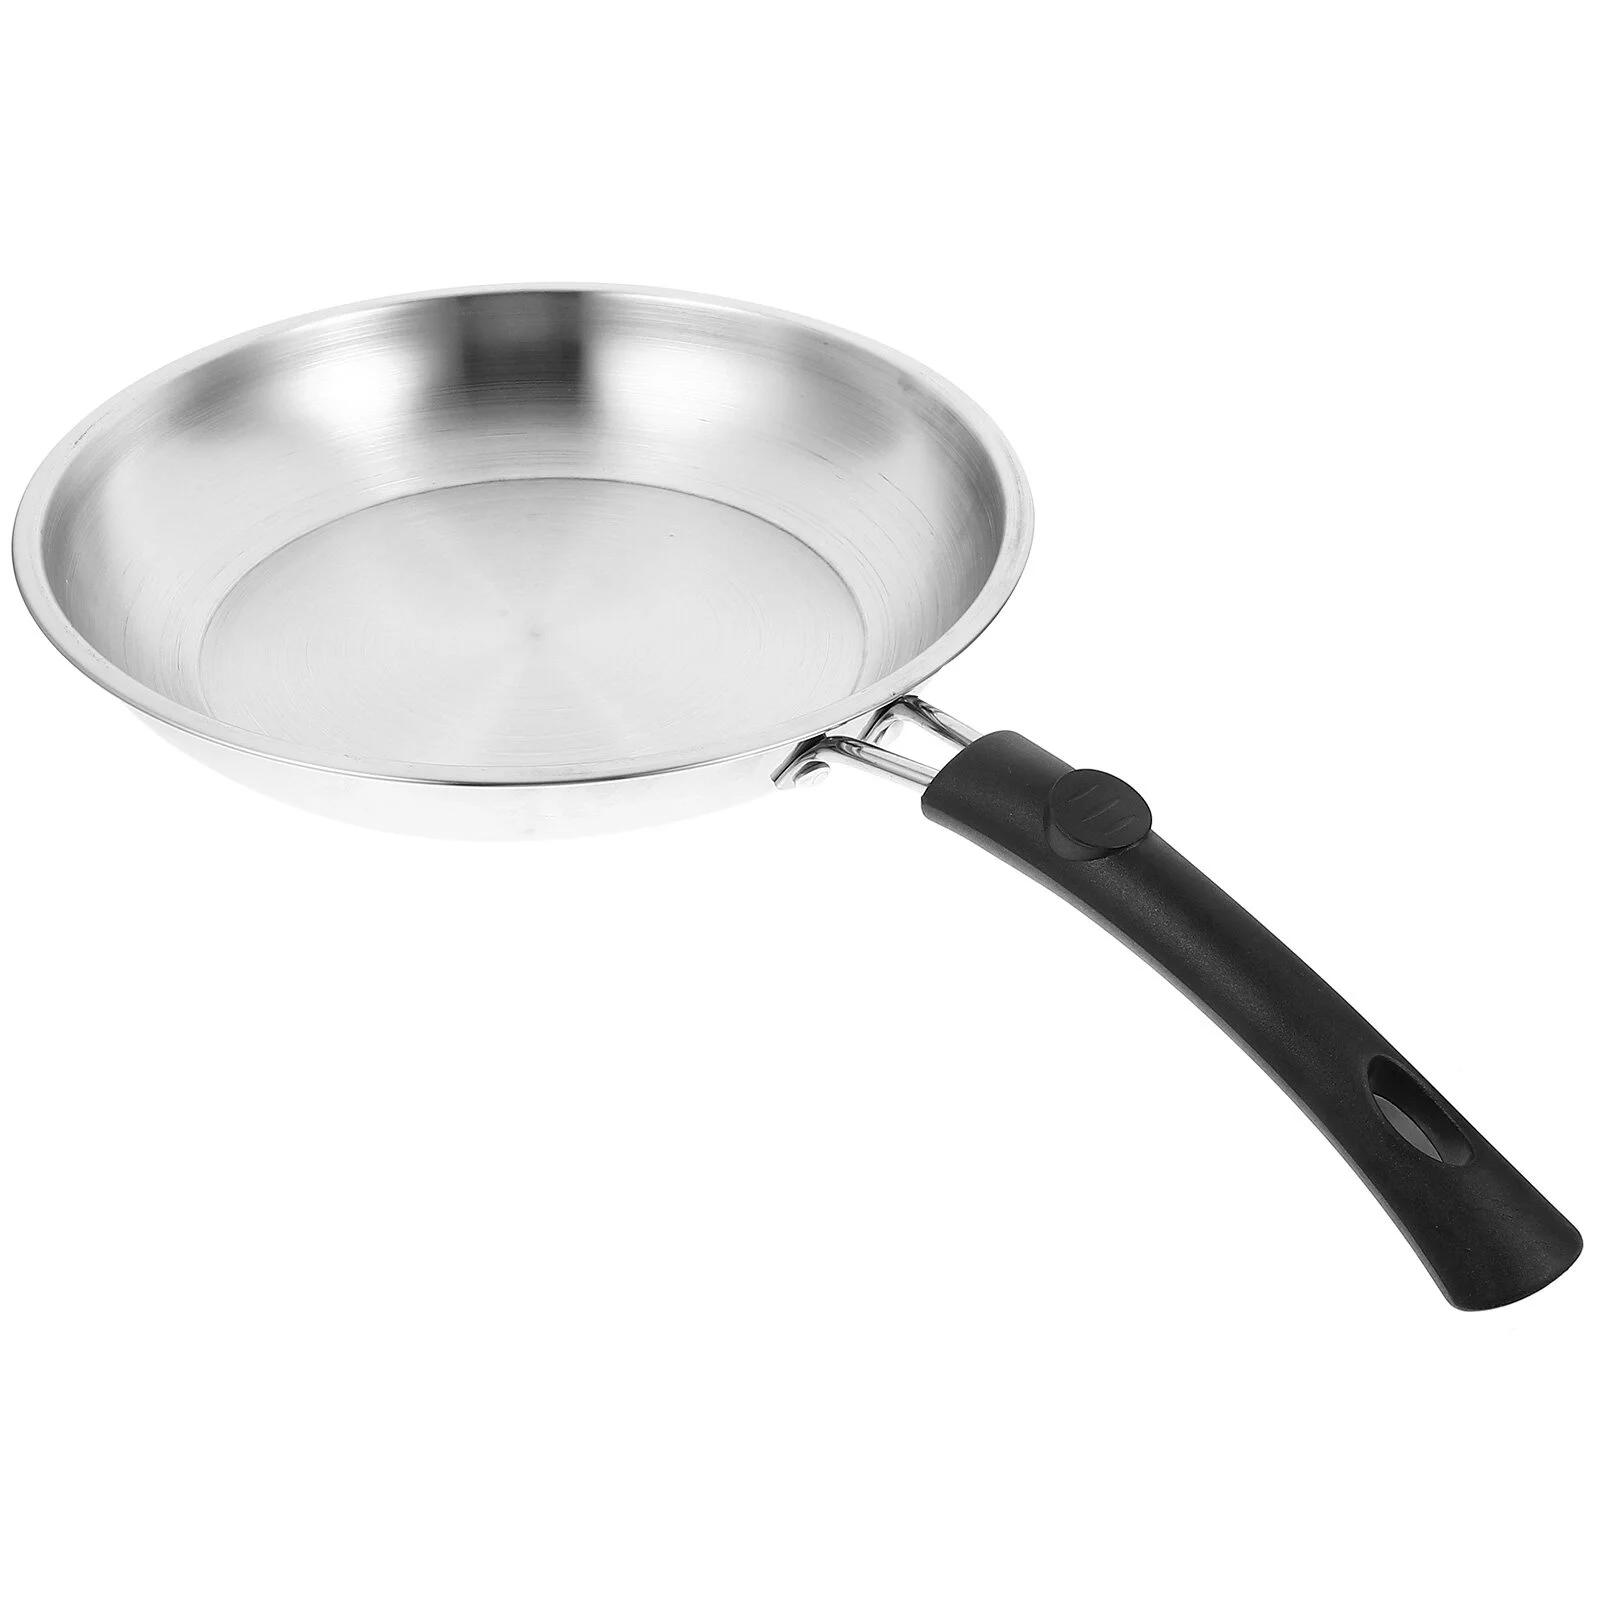 

Fryer Pan Caraway Nonstick Cookware Rounded Frying Non-stick Granite Wok Flat Cooking Stainless Steel Pot Kitchen Pans